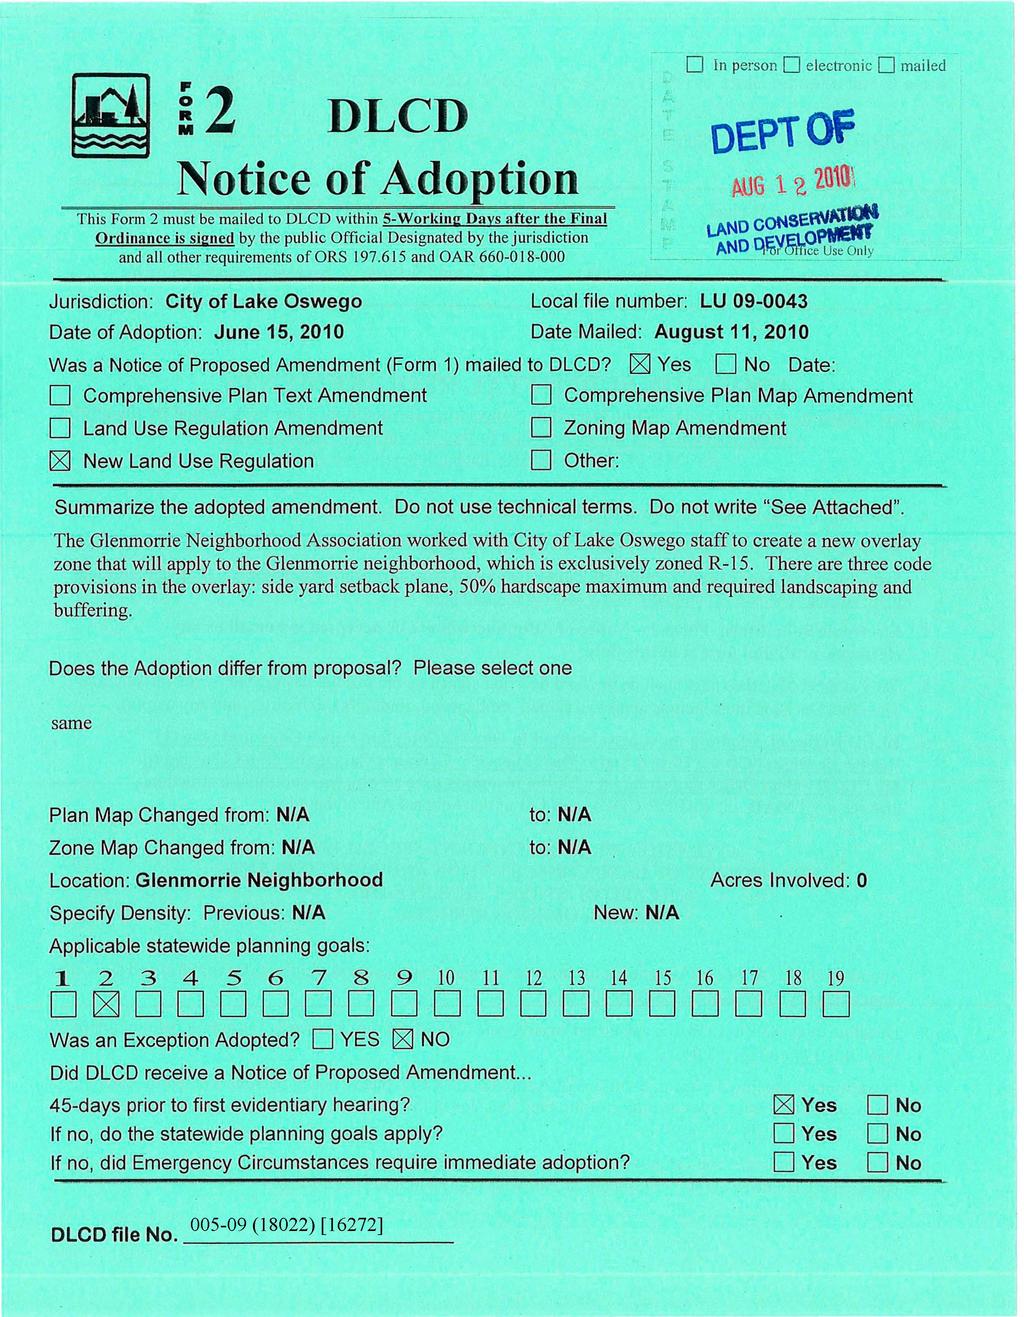 0 DLCD Notice of Adoption In person electronic mailed d e p t o p MJ6 1 2, im\ This Form 2 must be mailed to D L C D within S-Working Days after the Final Ordinance is signed by the public Official